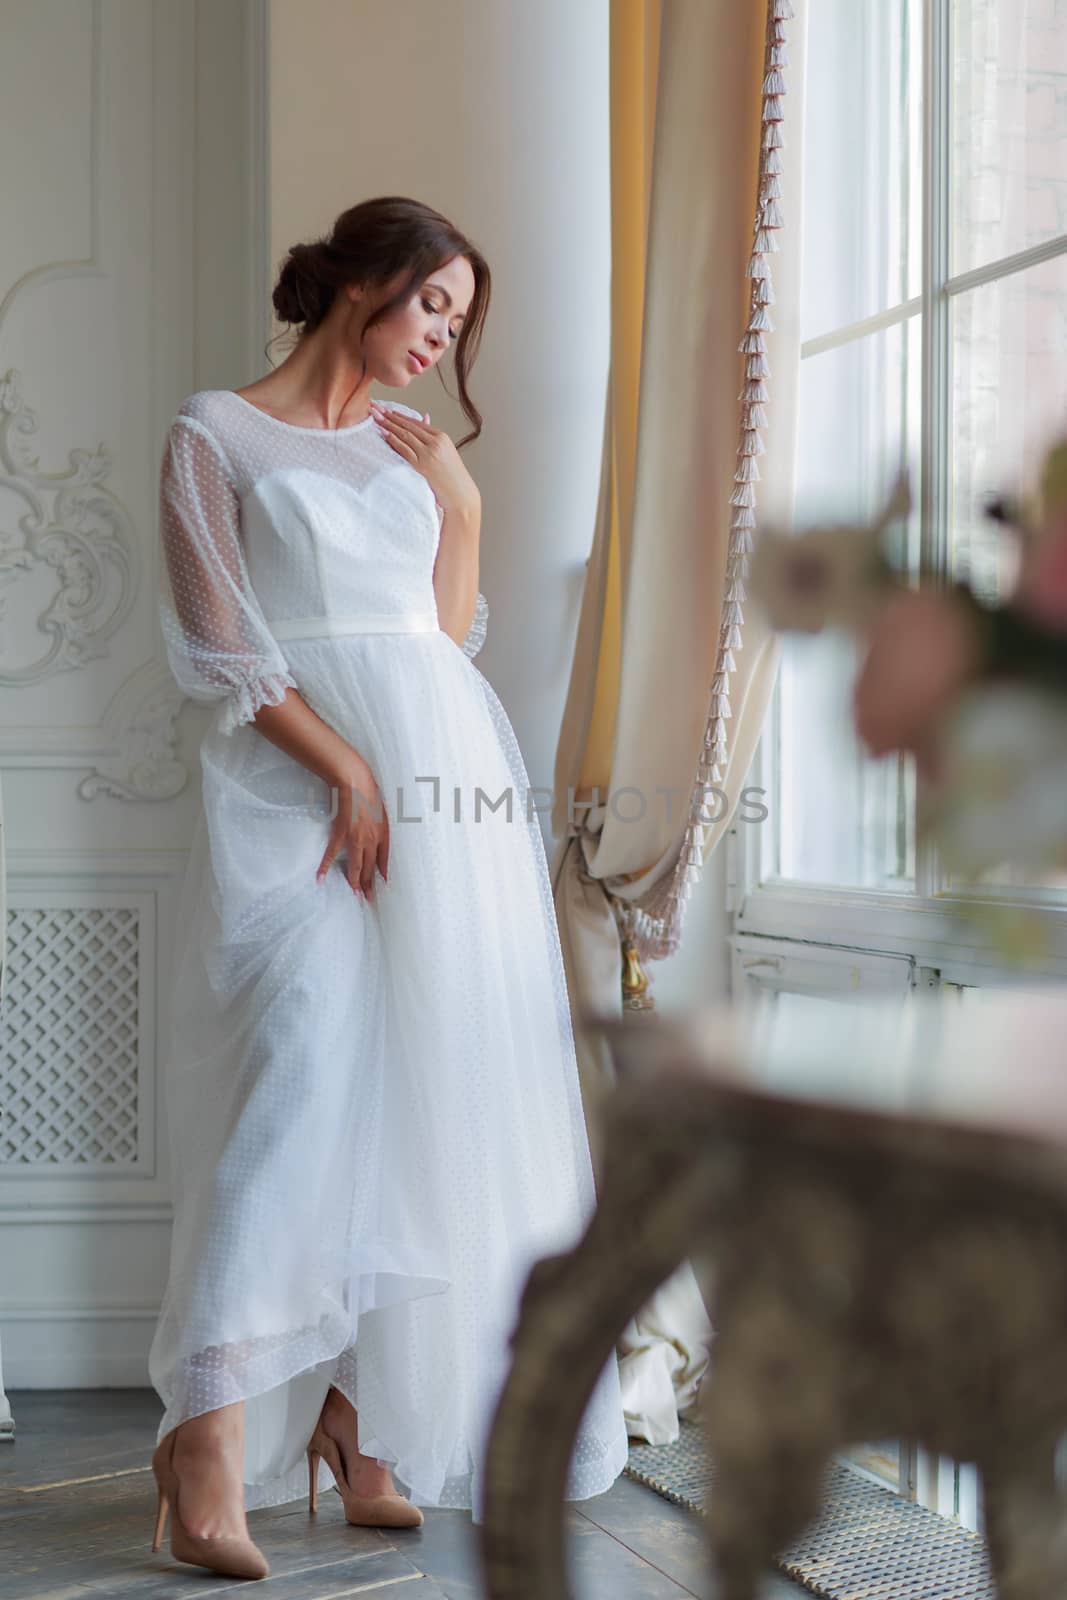 Full-length portrait of the bride in a white wedding dress by the window.